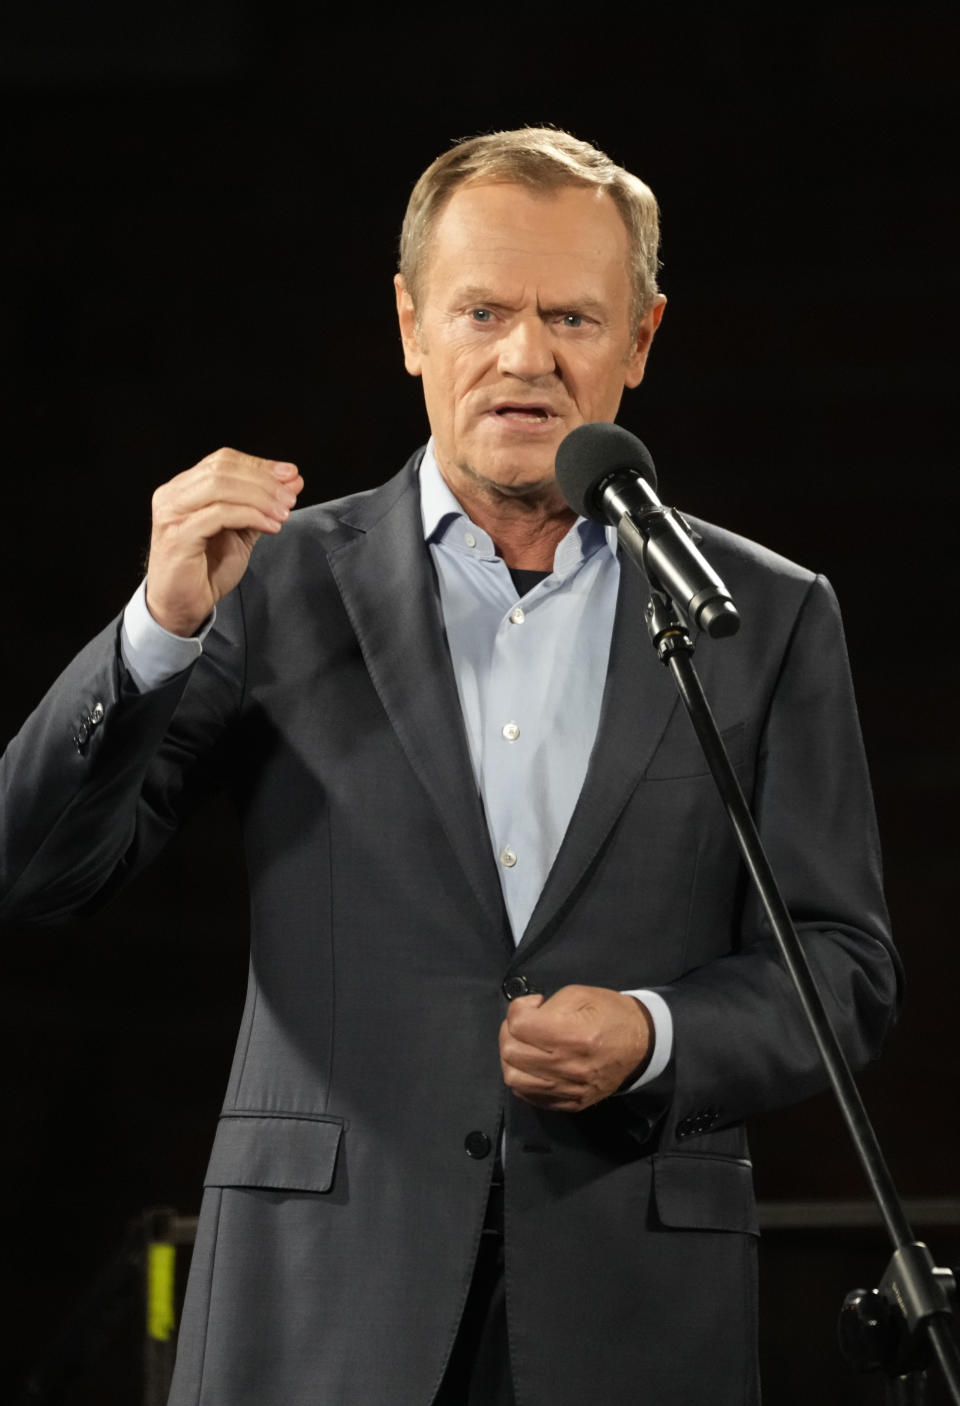 Former Polish Prime Minister Donald Tusk speaks from the podium during a demonstration in support of Poland's EU membership in Warsaw, Poland, Sunday, October 10, 2021. Poland's constitutional court ruled Thursday that Polish laws have supremacy over those of the European Union in areas where they clash, a decision likely to embolden the country's right-wing government and worsen its already troubled relationship with the EU. (AP Photo/Czarek Sokolowski)